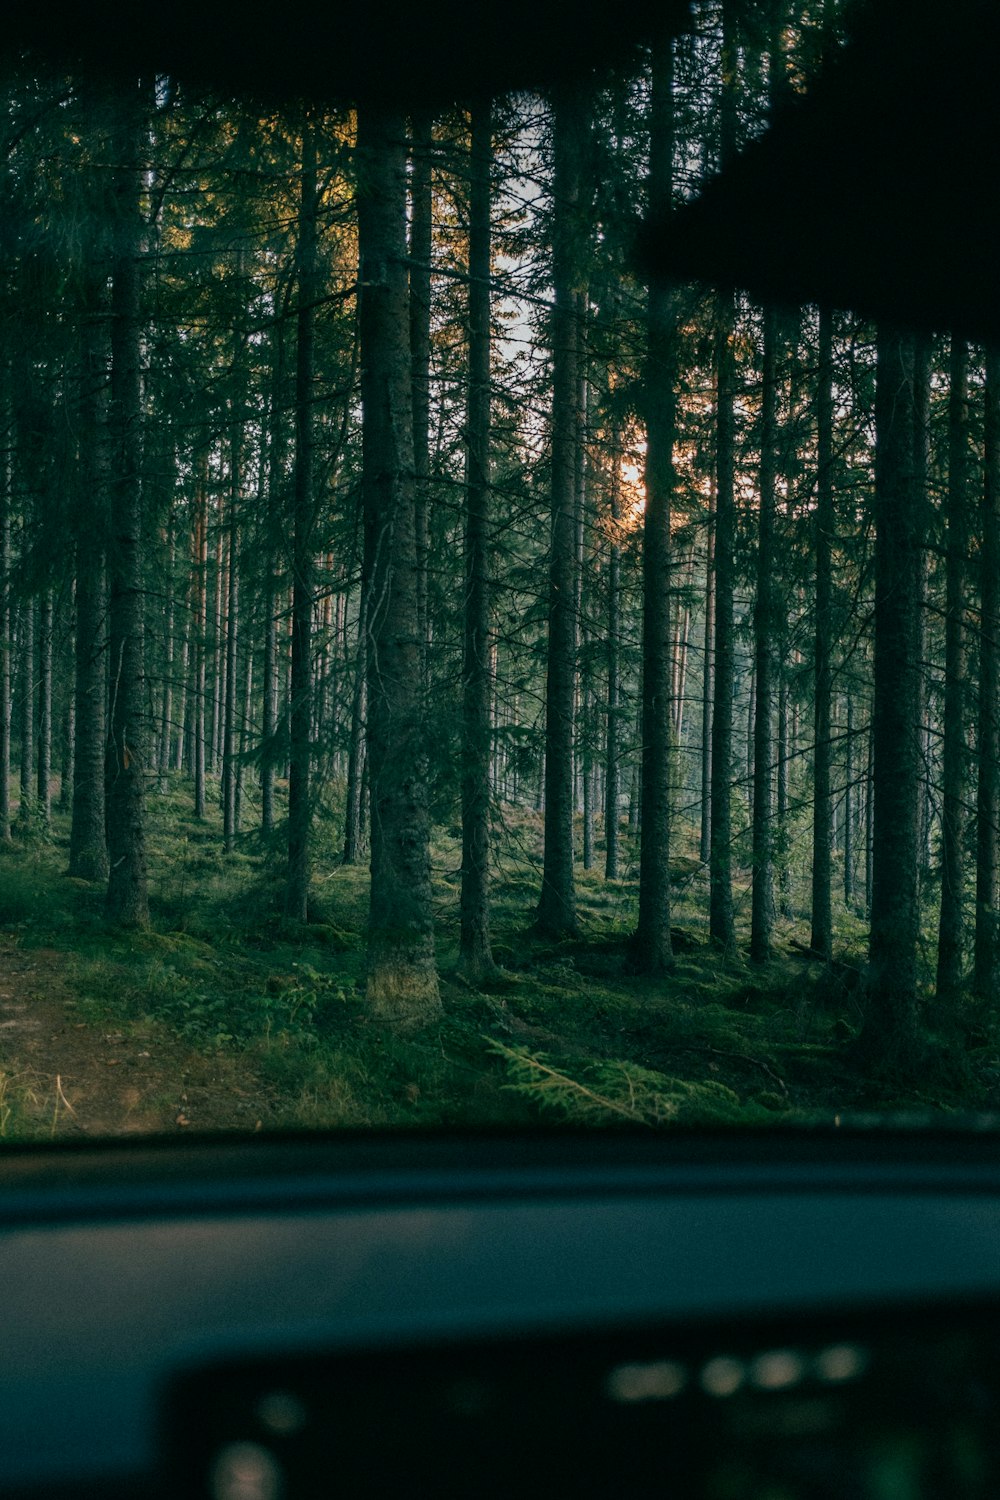 a car driving through a forest filled with tall trees